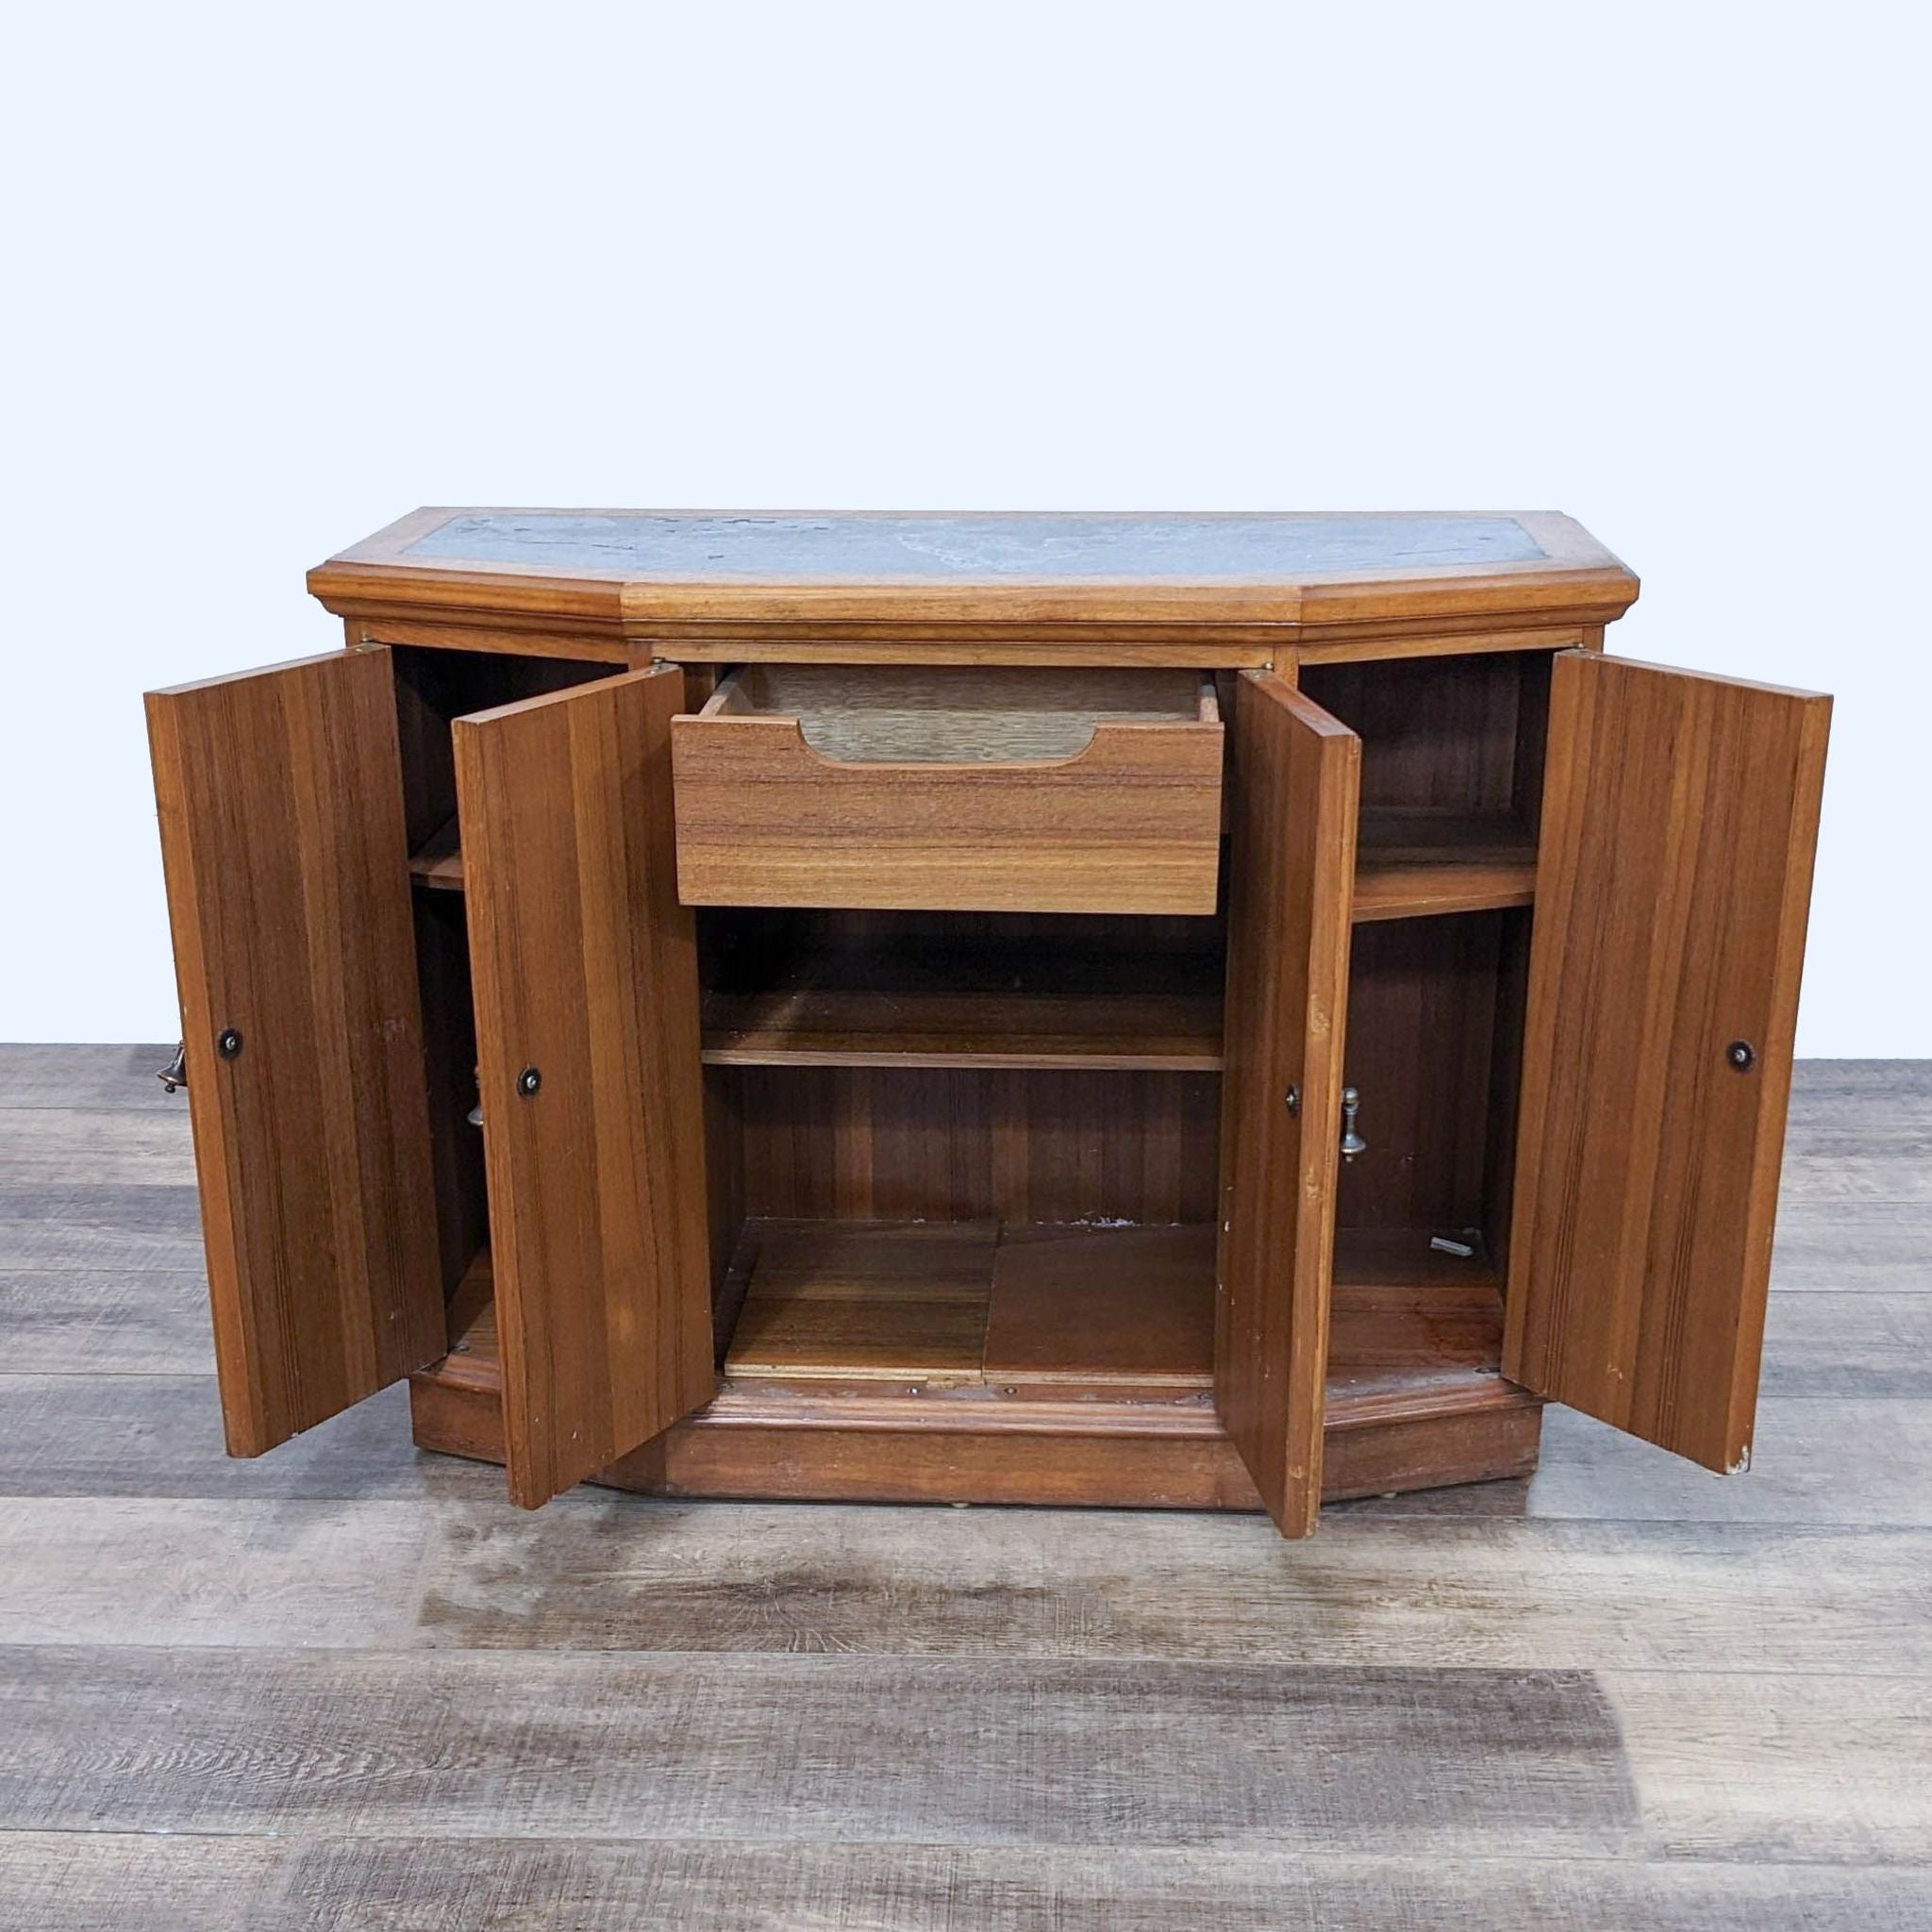 Alt text 2: Open four-paneled wooden sideboard with a silverware drawer and interior shelving, revealing storage space.